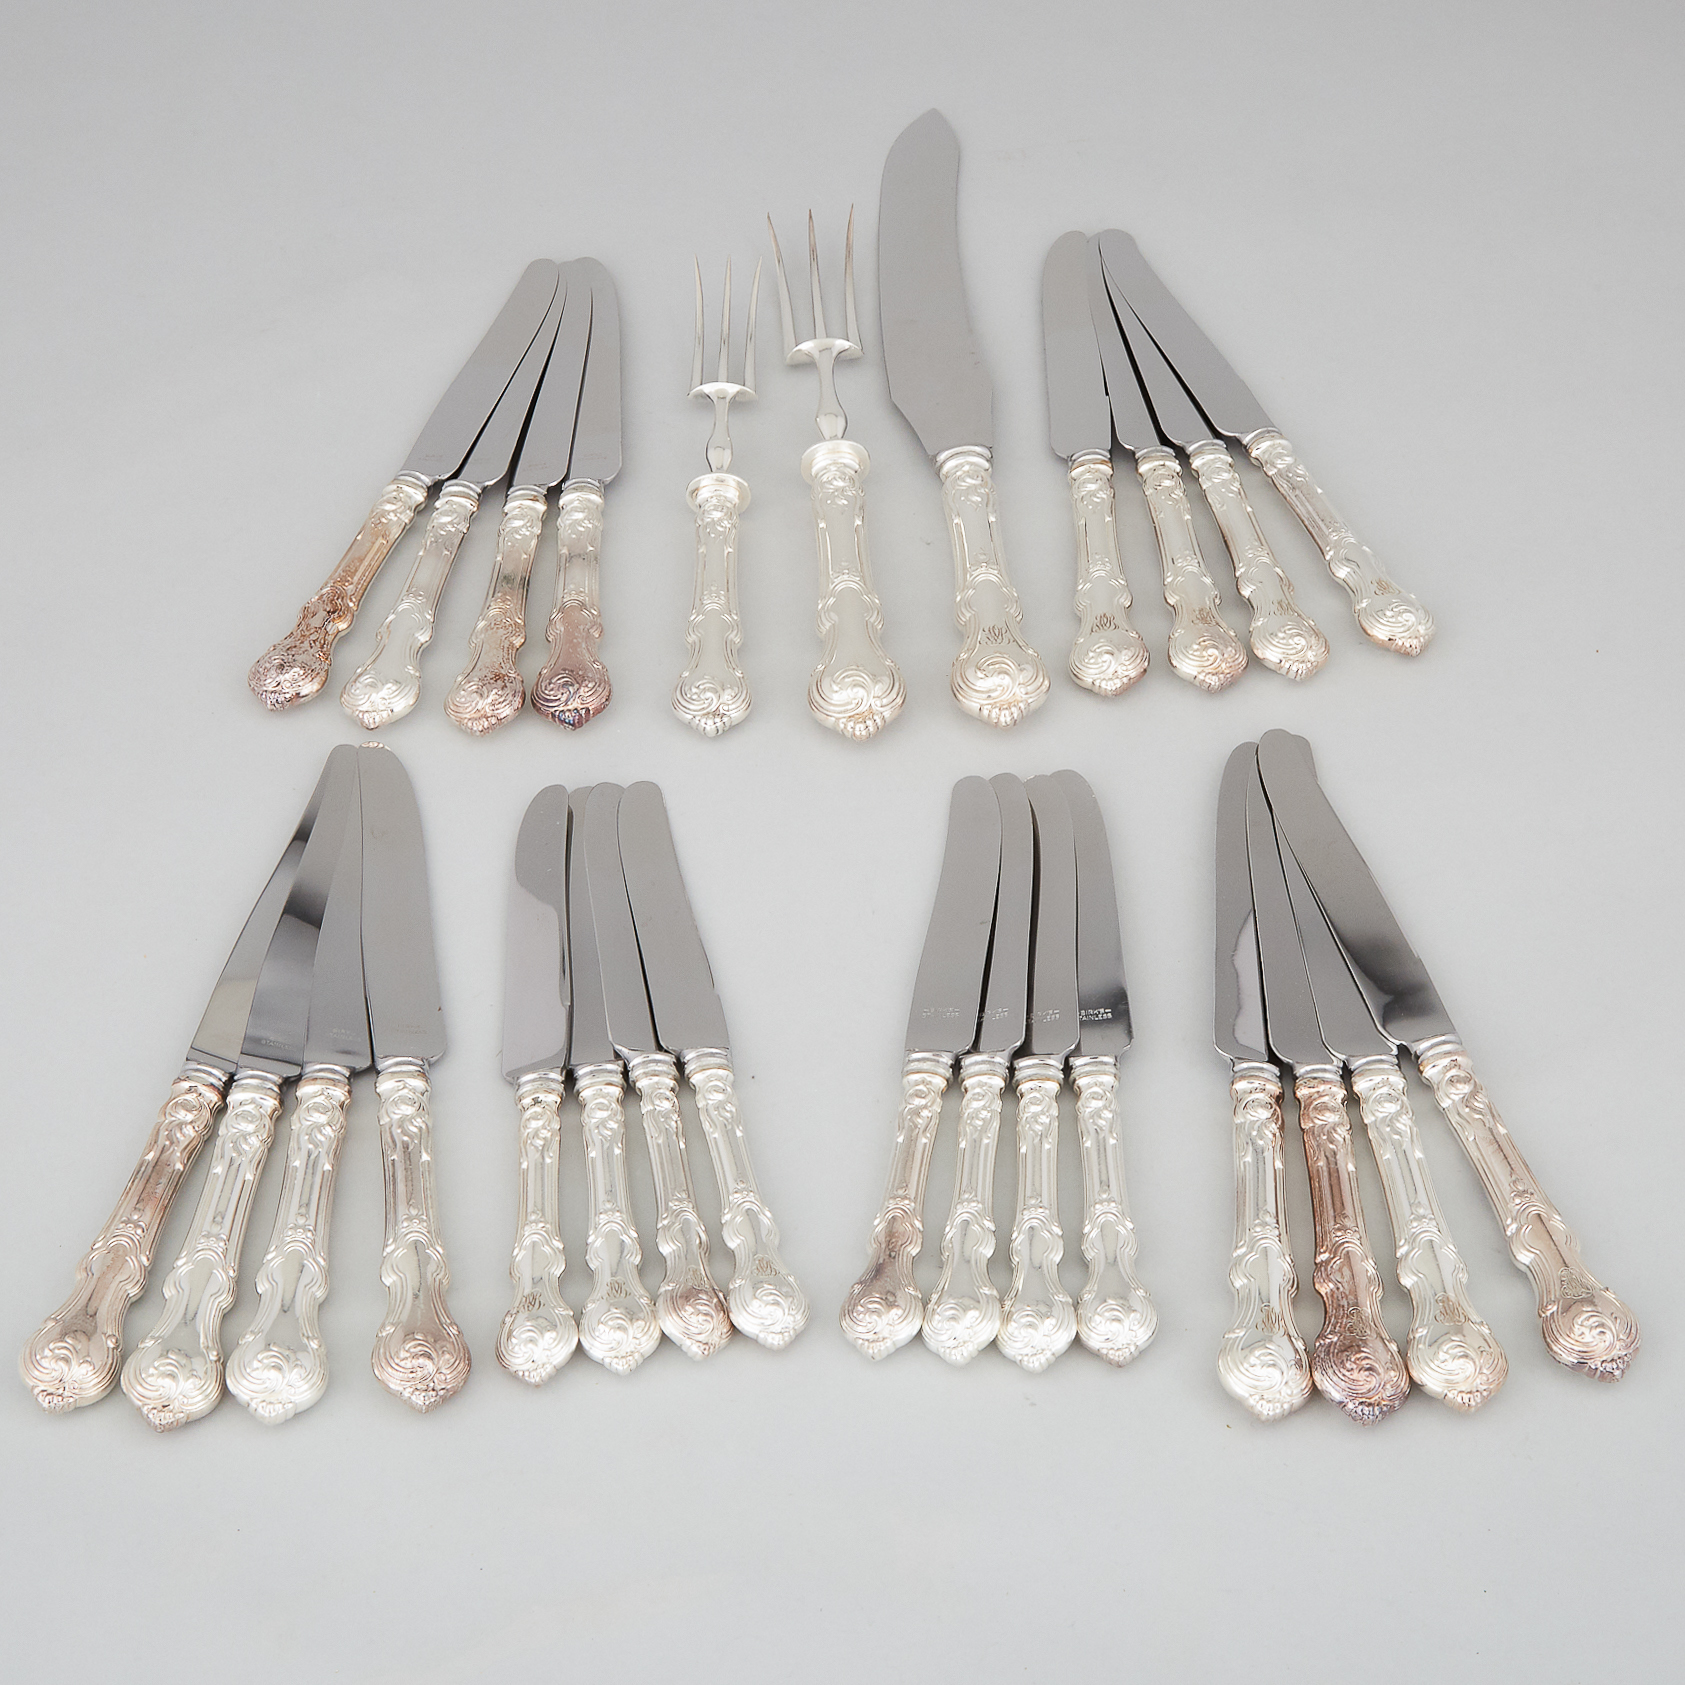 Sixteen French Silver Plated Table Knives, Eight Luncheon Knives and a Three-Piece Carving Set, Christofle, c.1900